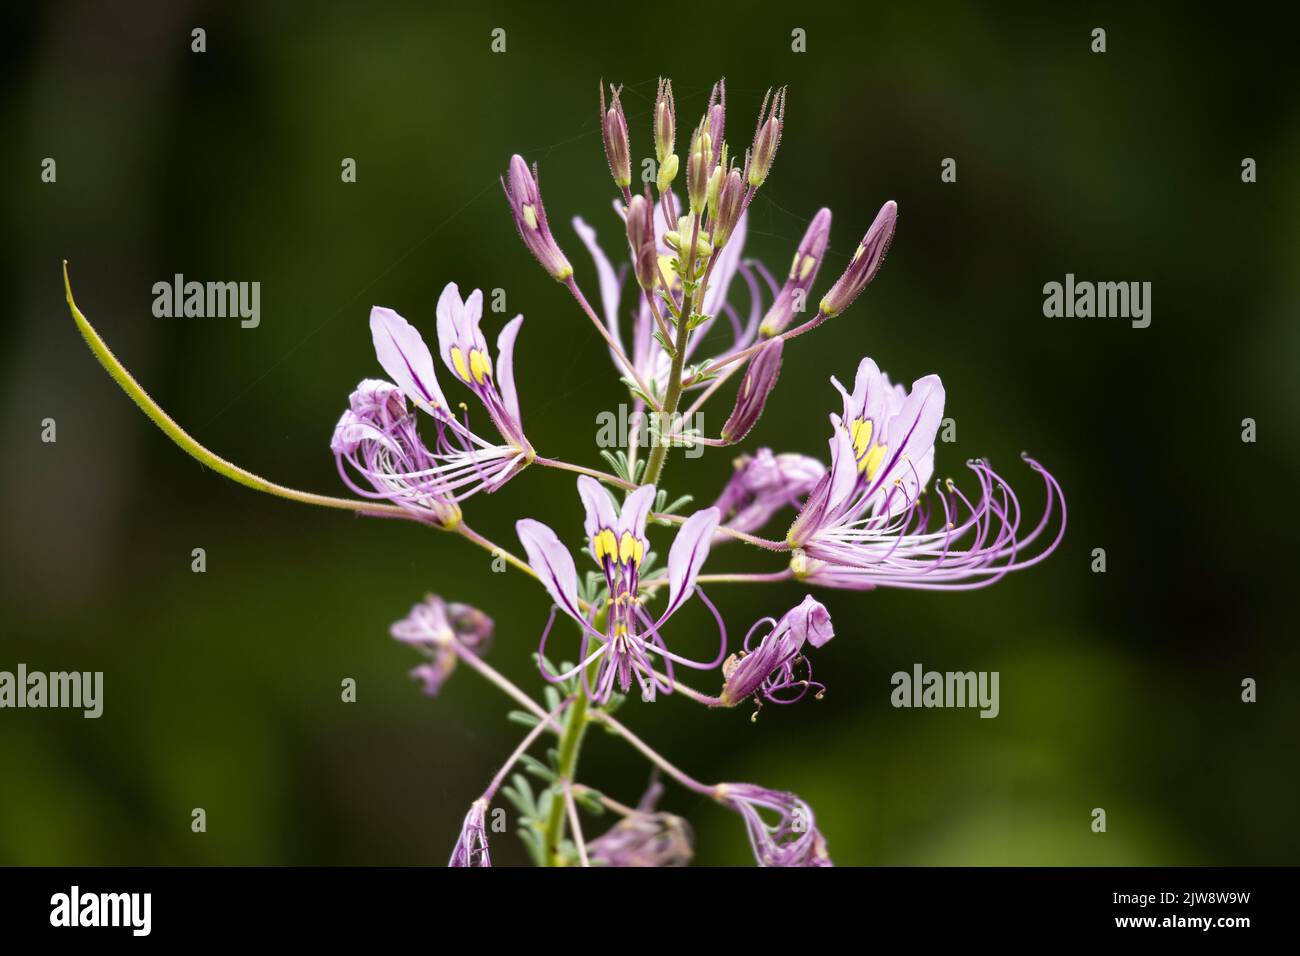 The distinctive flowers of the Pretty Lady have distinctive long stamens. They flower for a long period and often on roadsides and disturbed ground. Stock Photo